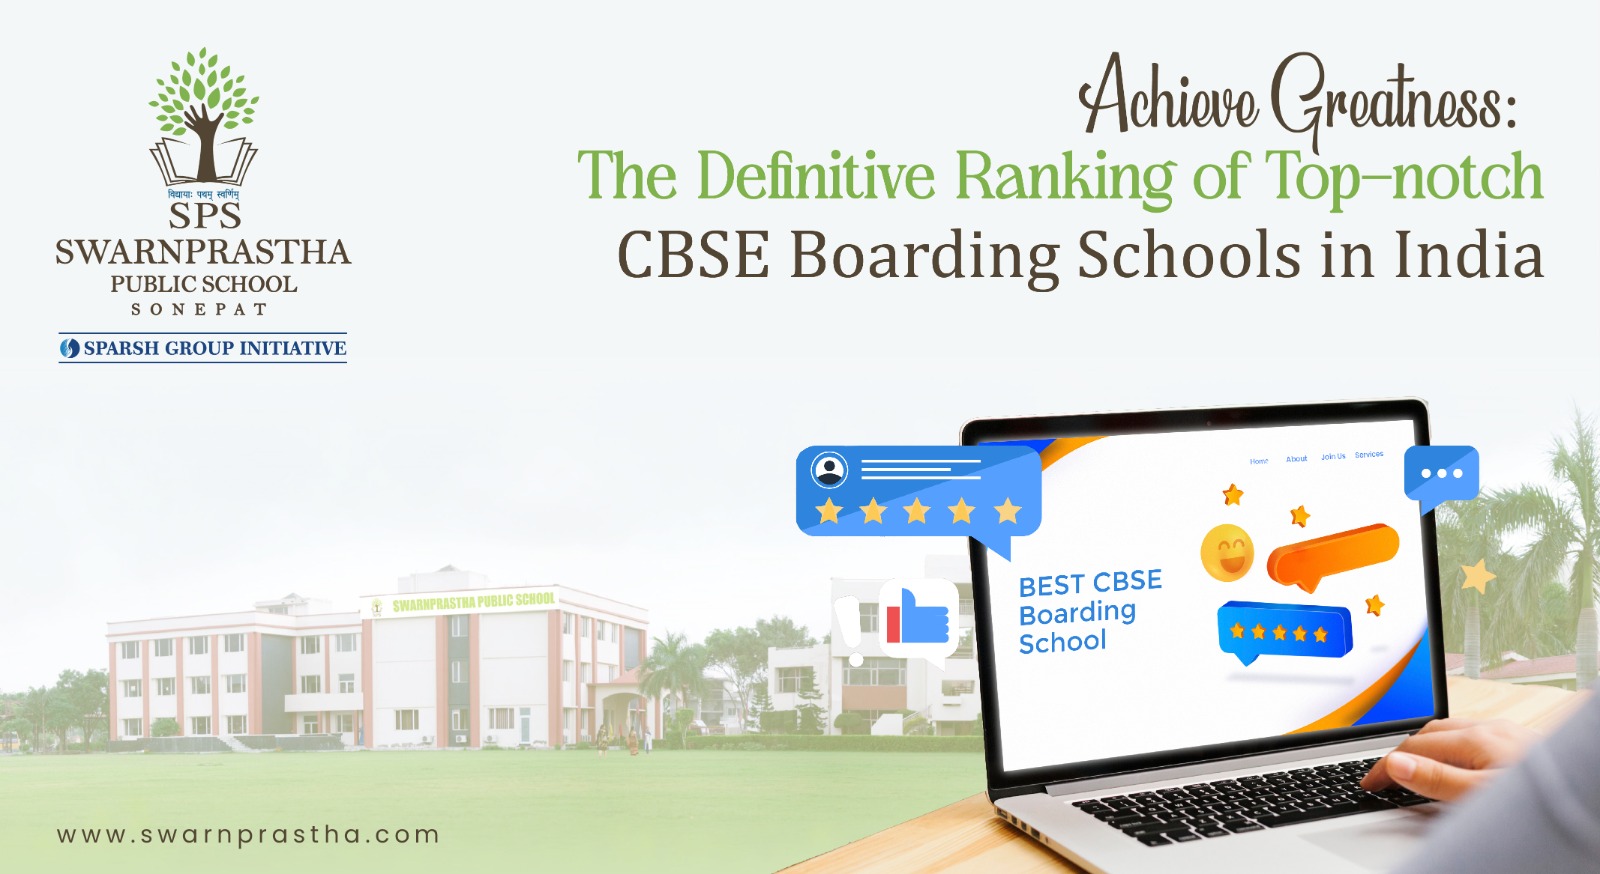 Achieve Greatness: The Definitive Ranking of Top-notch CBSE Boarding Schools in India